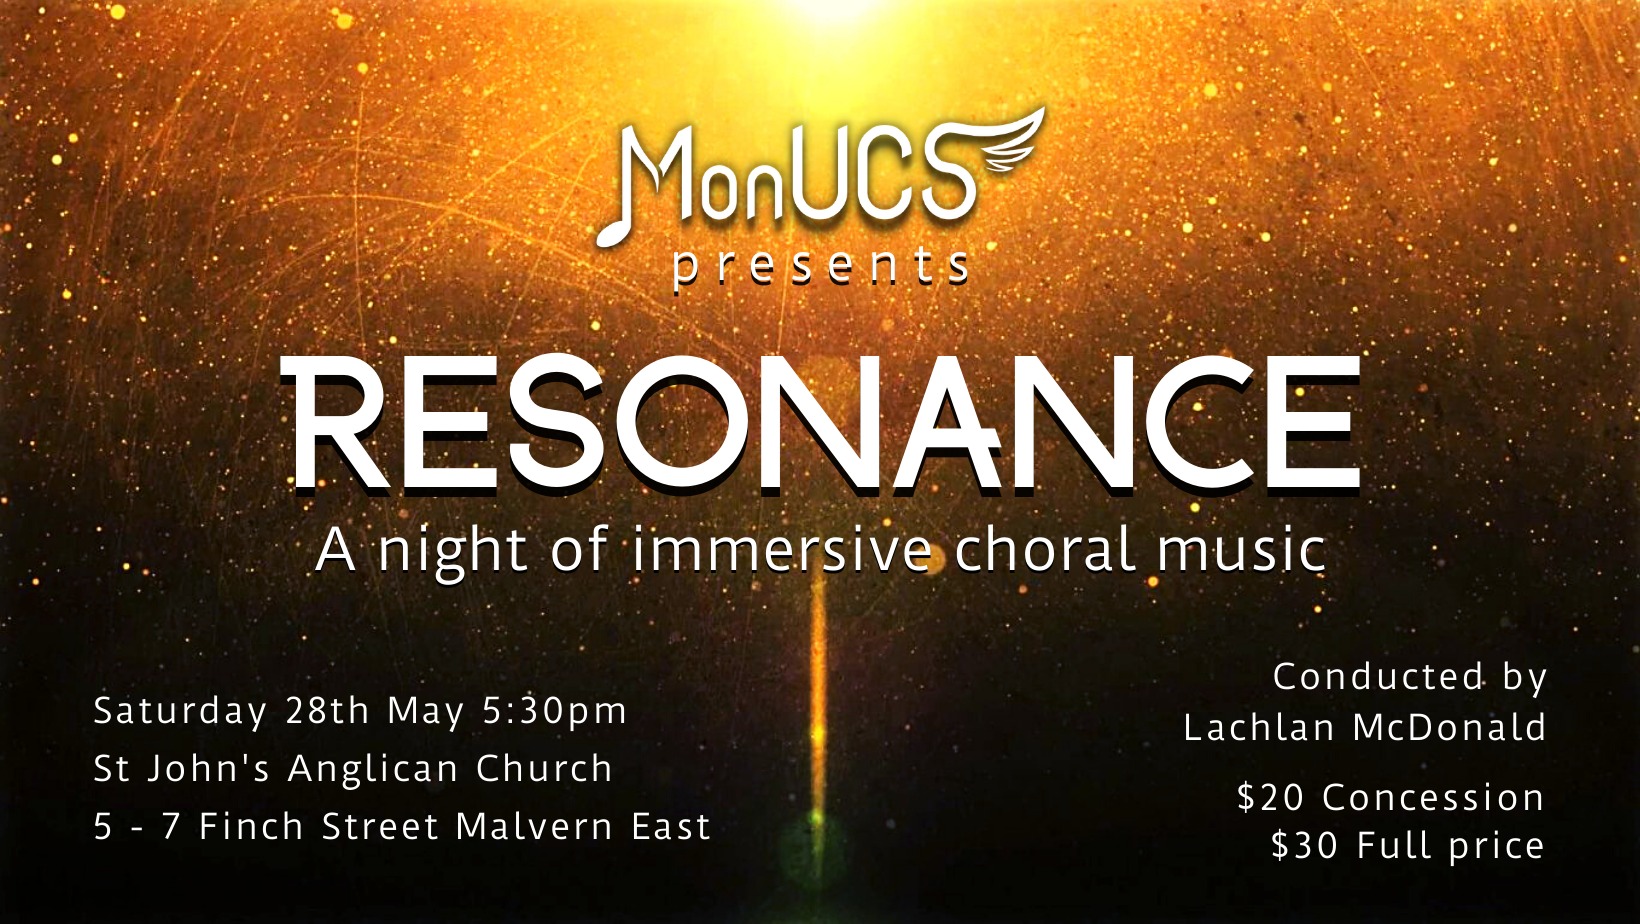 Our banner advertsnig our concert "Resonance: A night of immersive choral music", with other information that is in the post